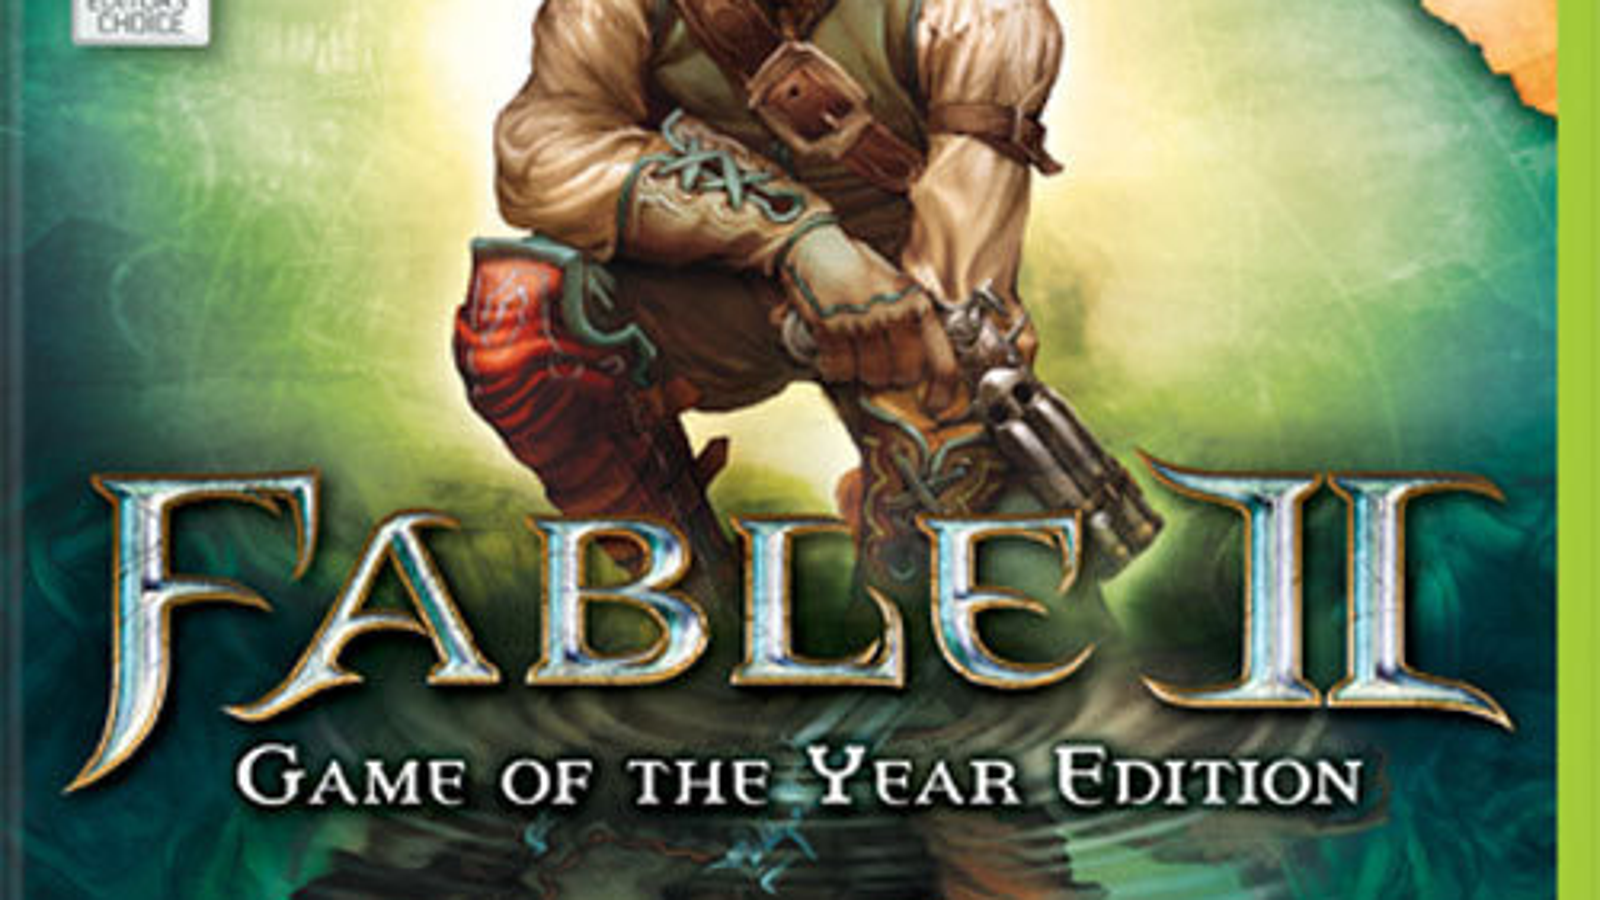 fable 3 game download